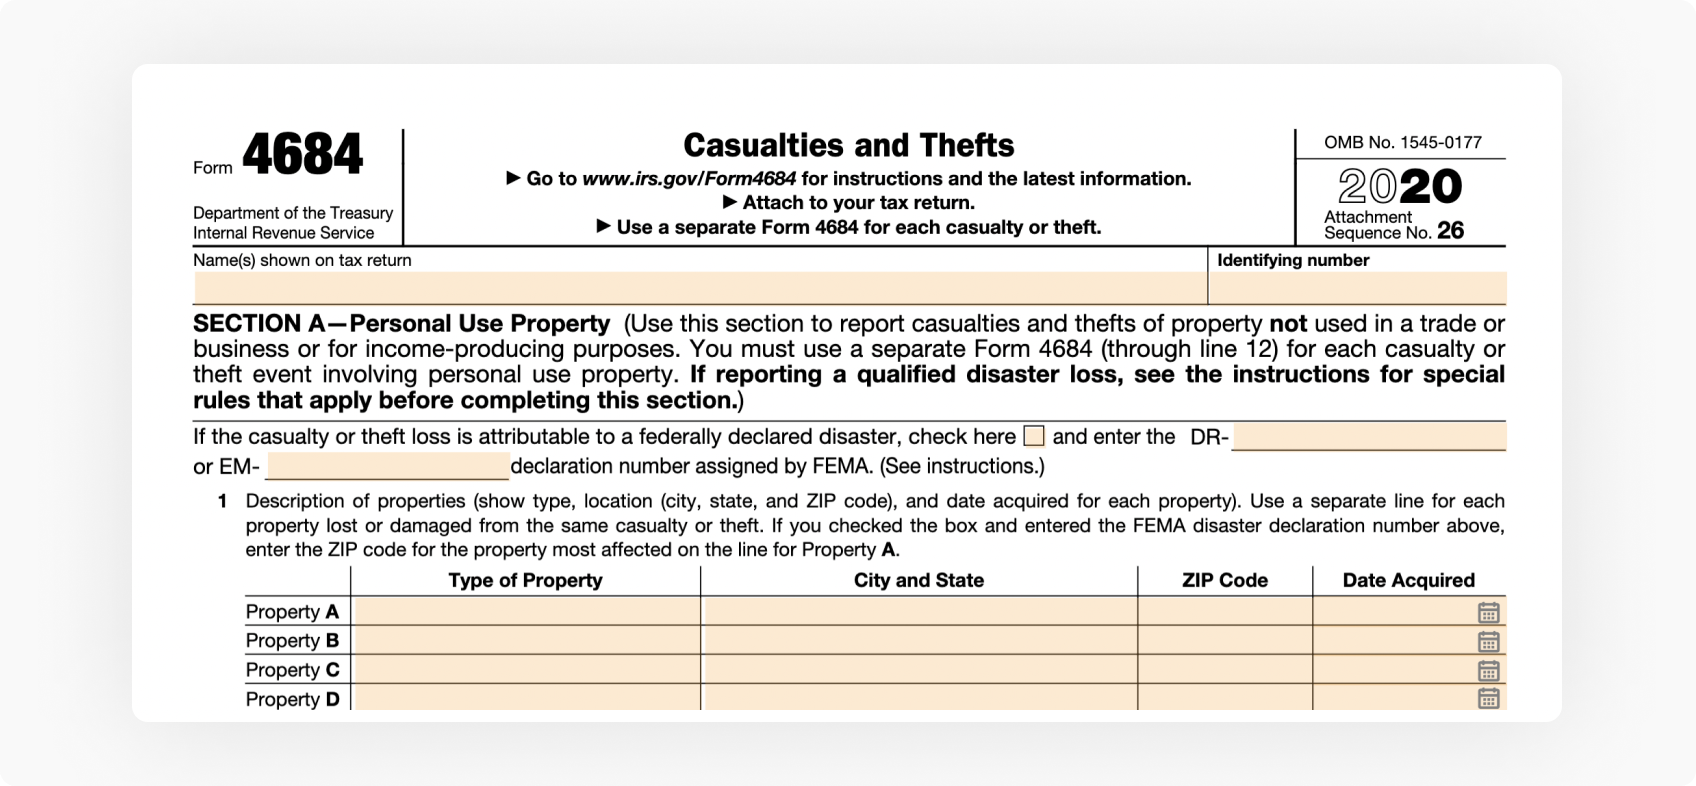 IRS form 4684 is filed to report casualties and thefts of property to the IRS